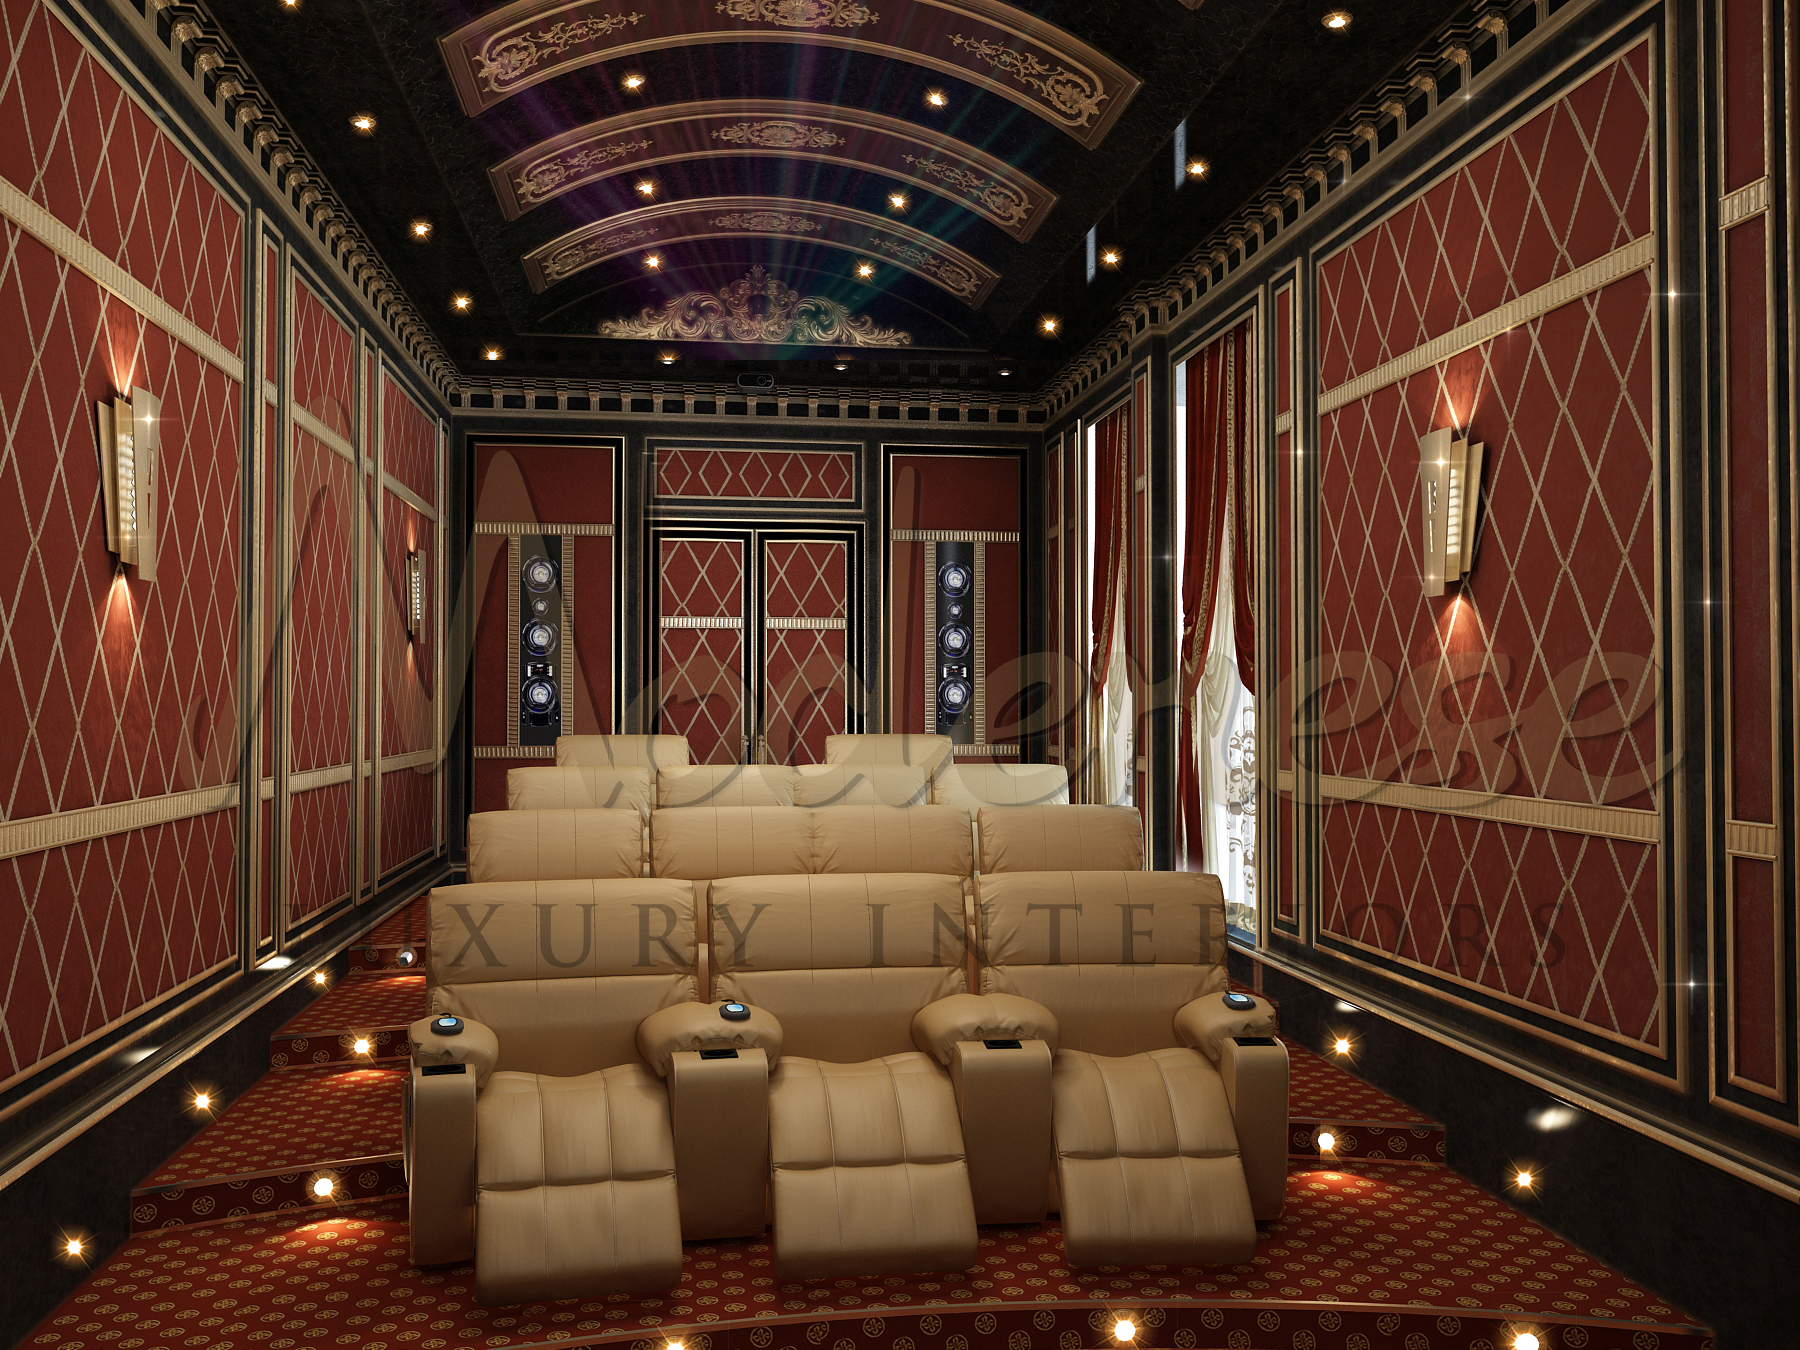 High quality materials, high-end Italian quality, best ideas for your perfect and luxury exclusive design project. Exclusive home interior design idea for cinema home. Bespoke interiors for the most amazing villa design.